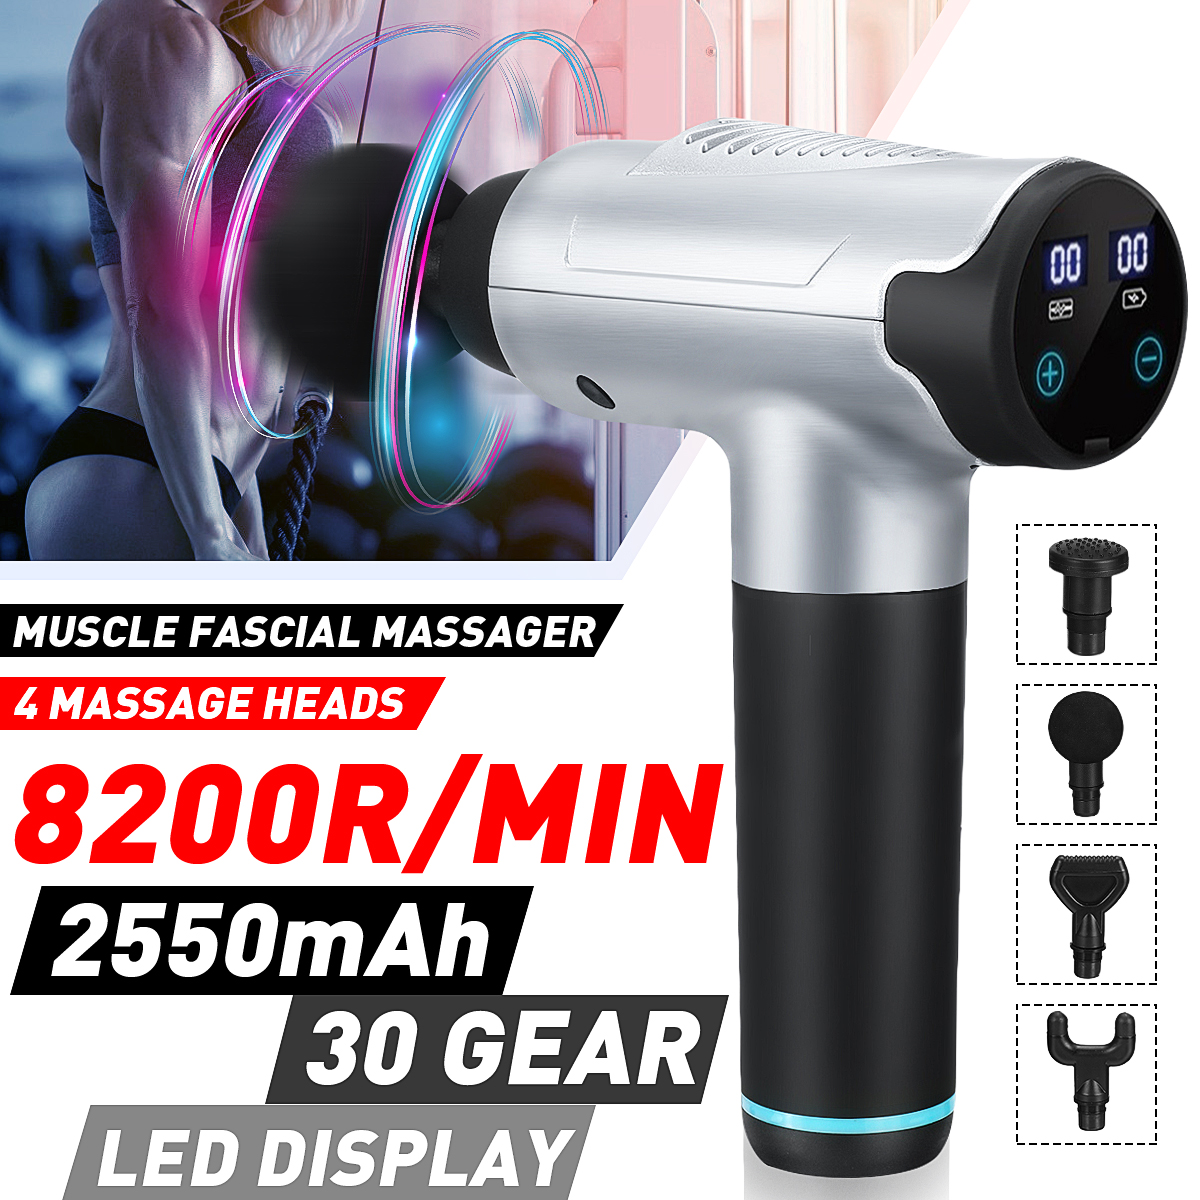 30-Gears-Adjustment-8200rmp-Fascial-Massager-Rechargeable-Muscle-Massager-Sports-Pain-Relaxing-Equip-1840923-1